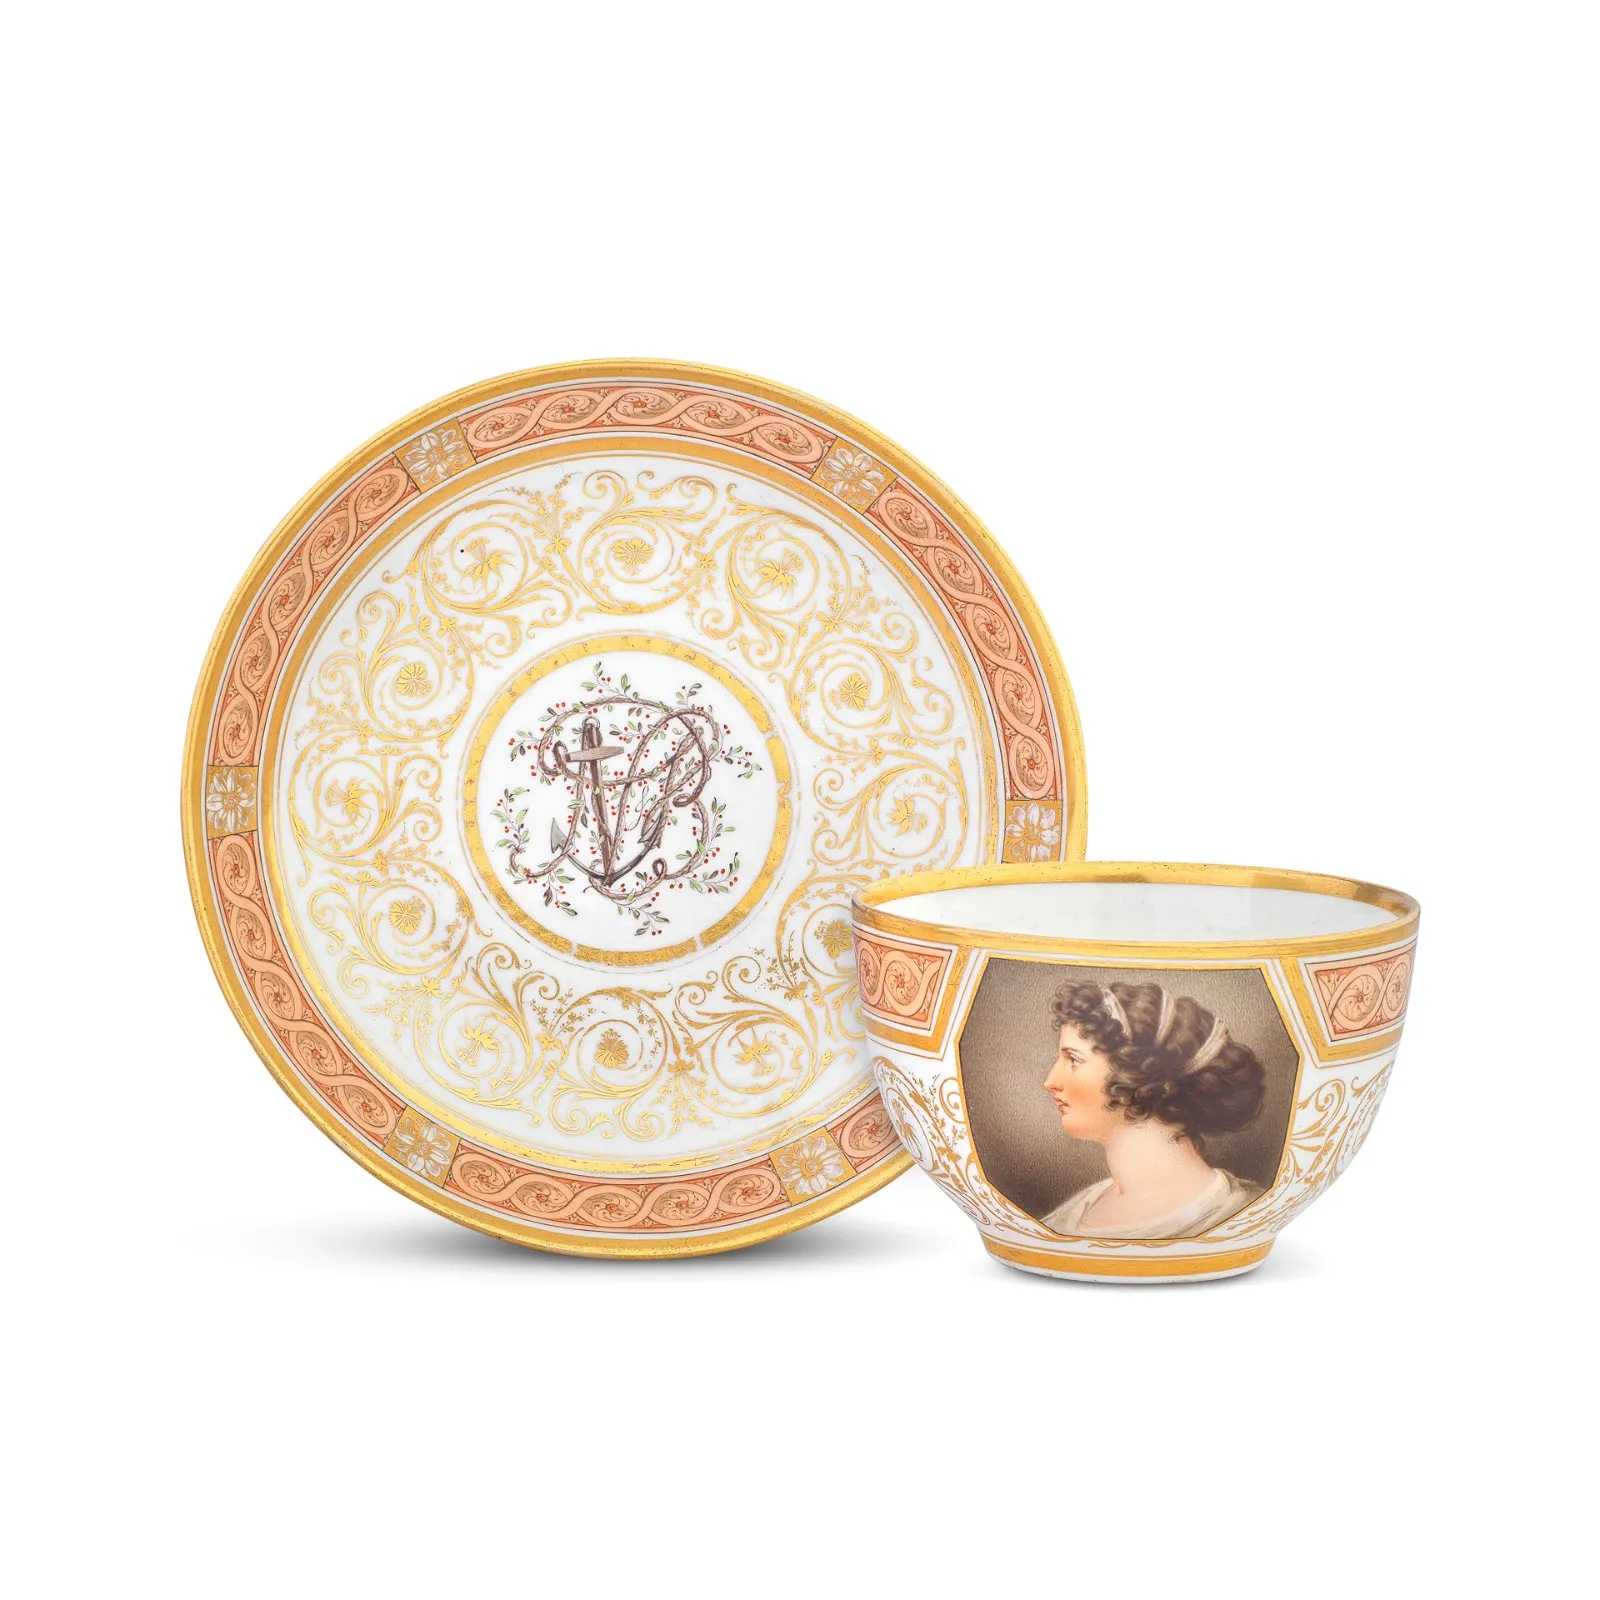 Nelson and Emma: An important Coalport cup and saucer by Thomas Baxter, estimated at £15,000-£25,000 ($18,845-$31,410) at Bonhams.